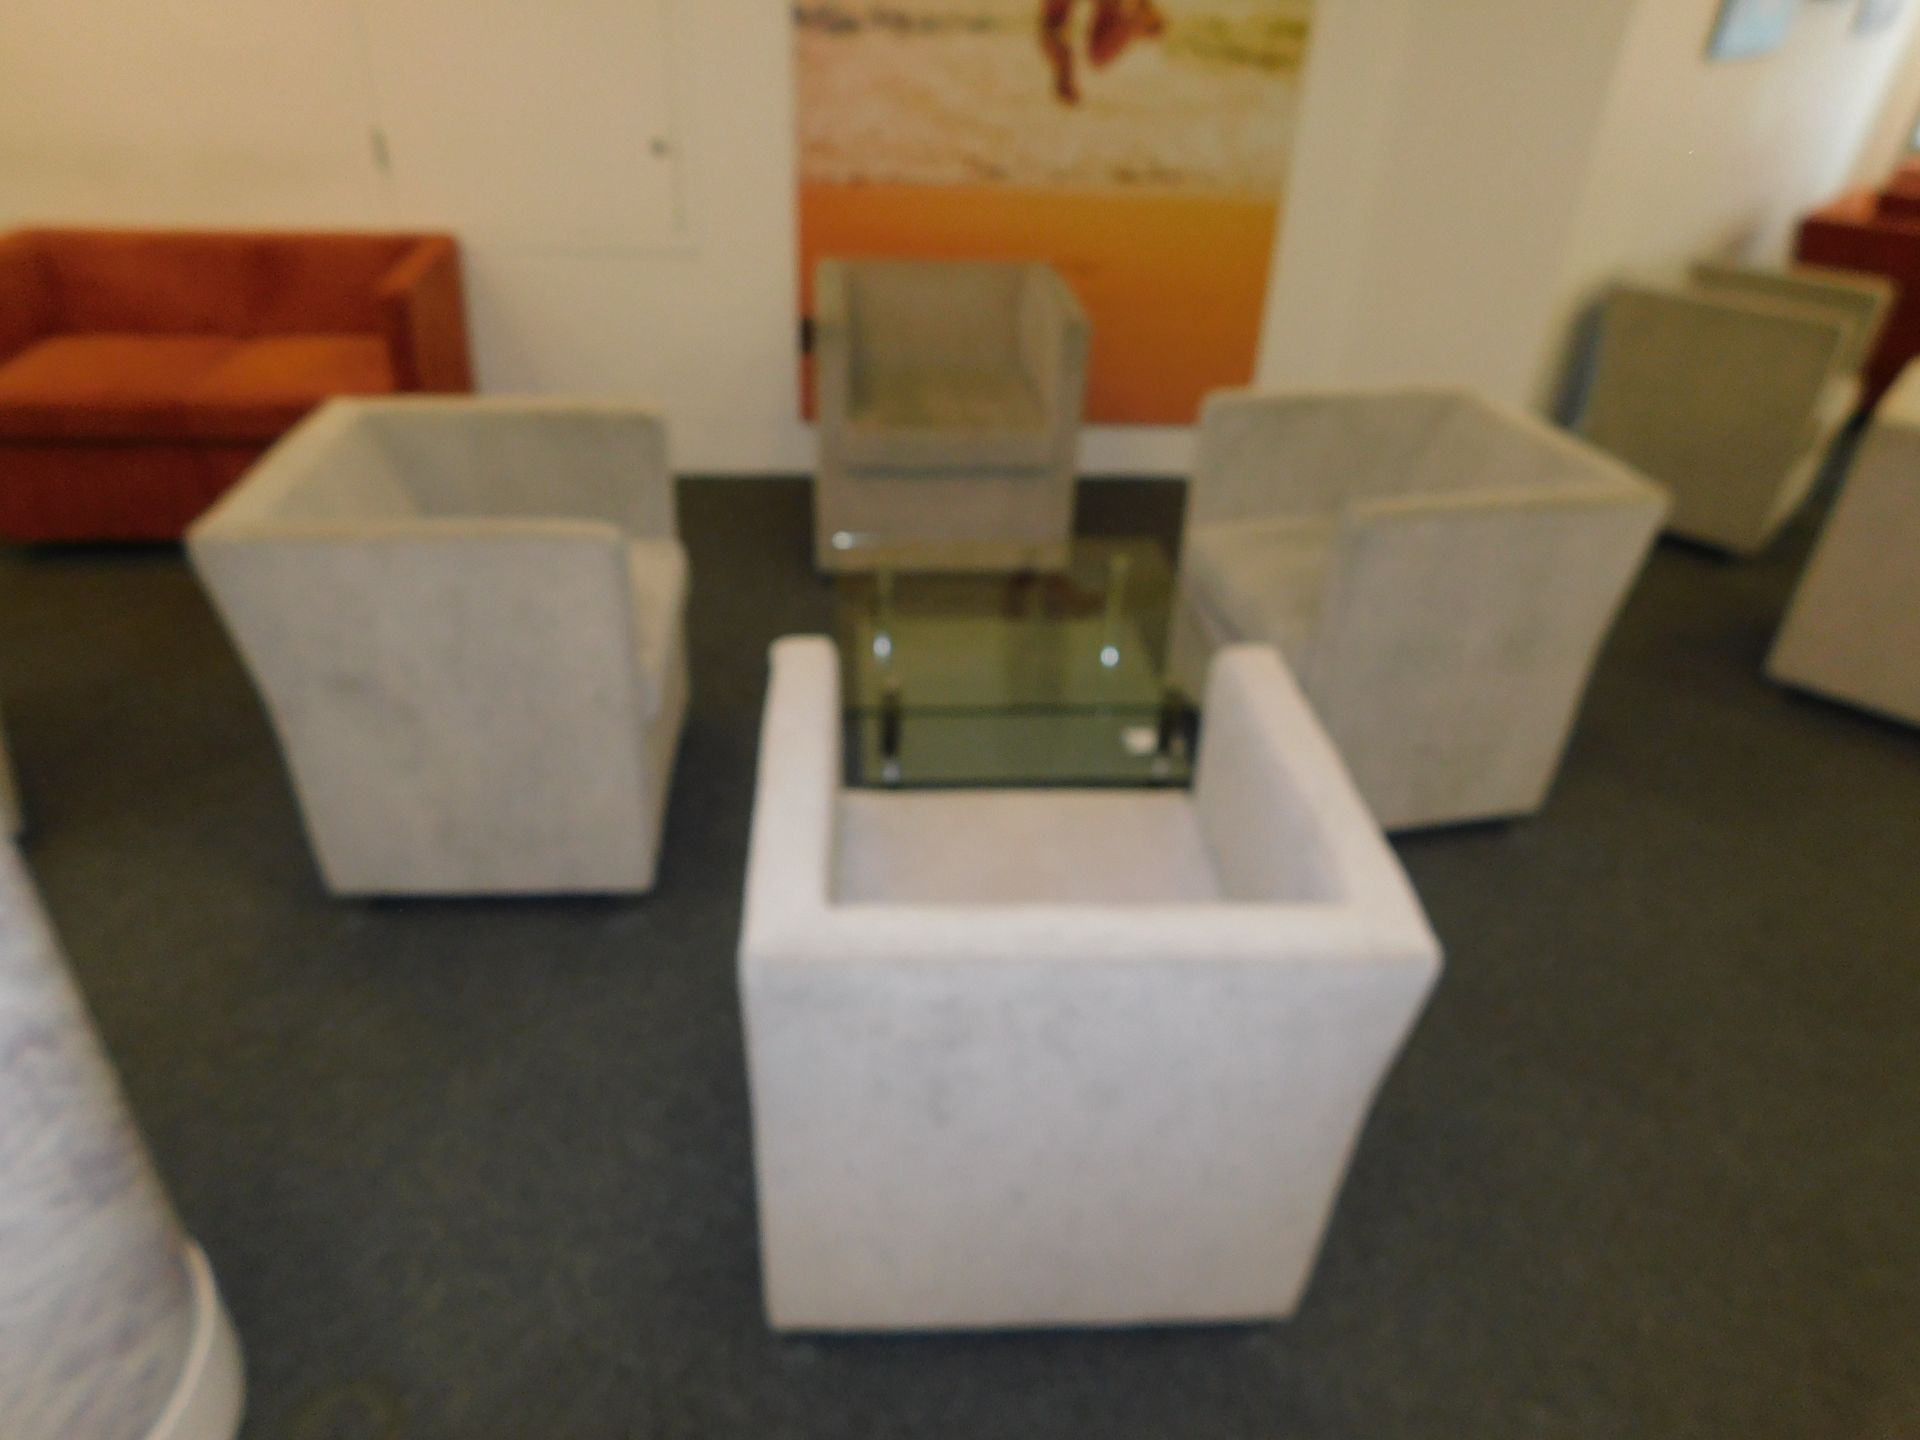 4 Jack Chairs with Glass Coffee Table (Located Stockport - See General Notes for More Details)